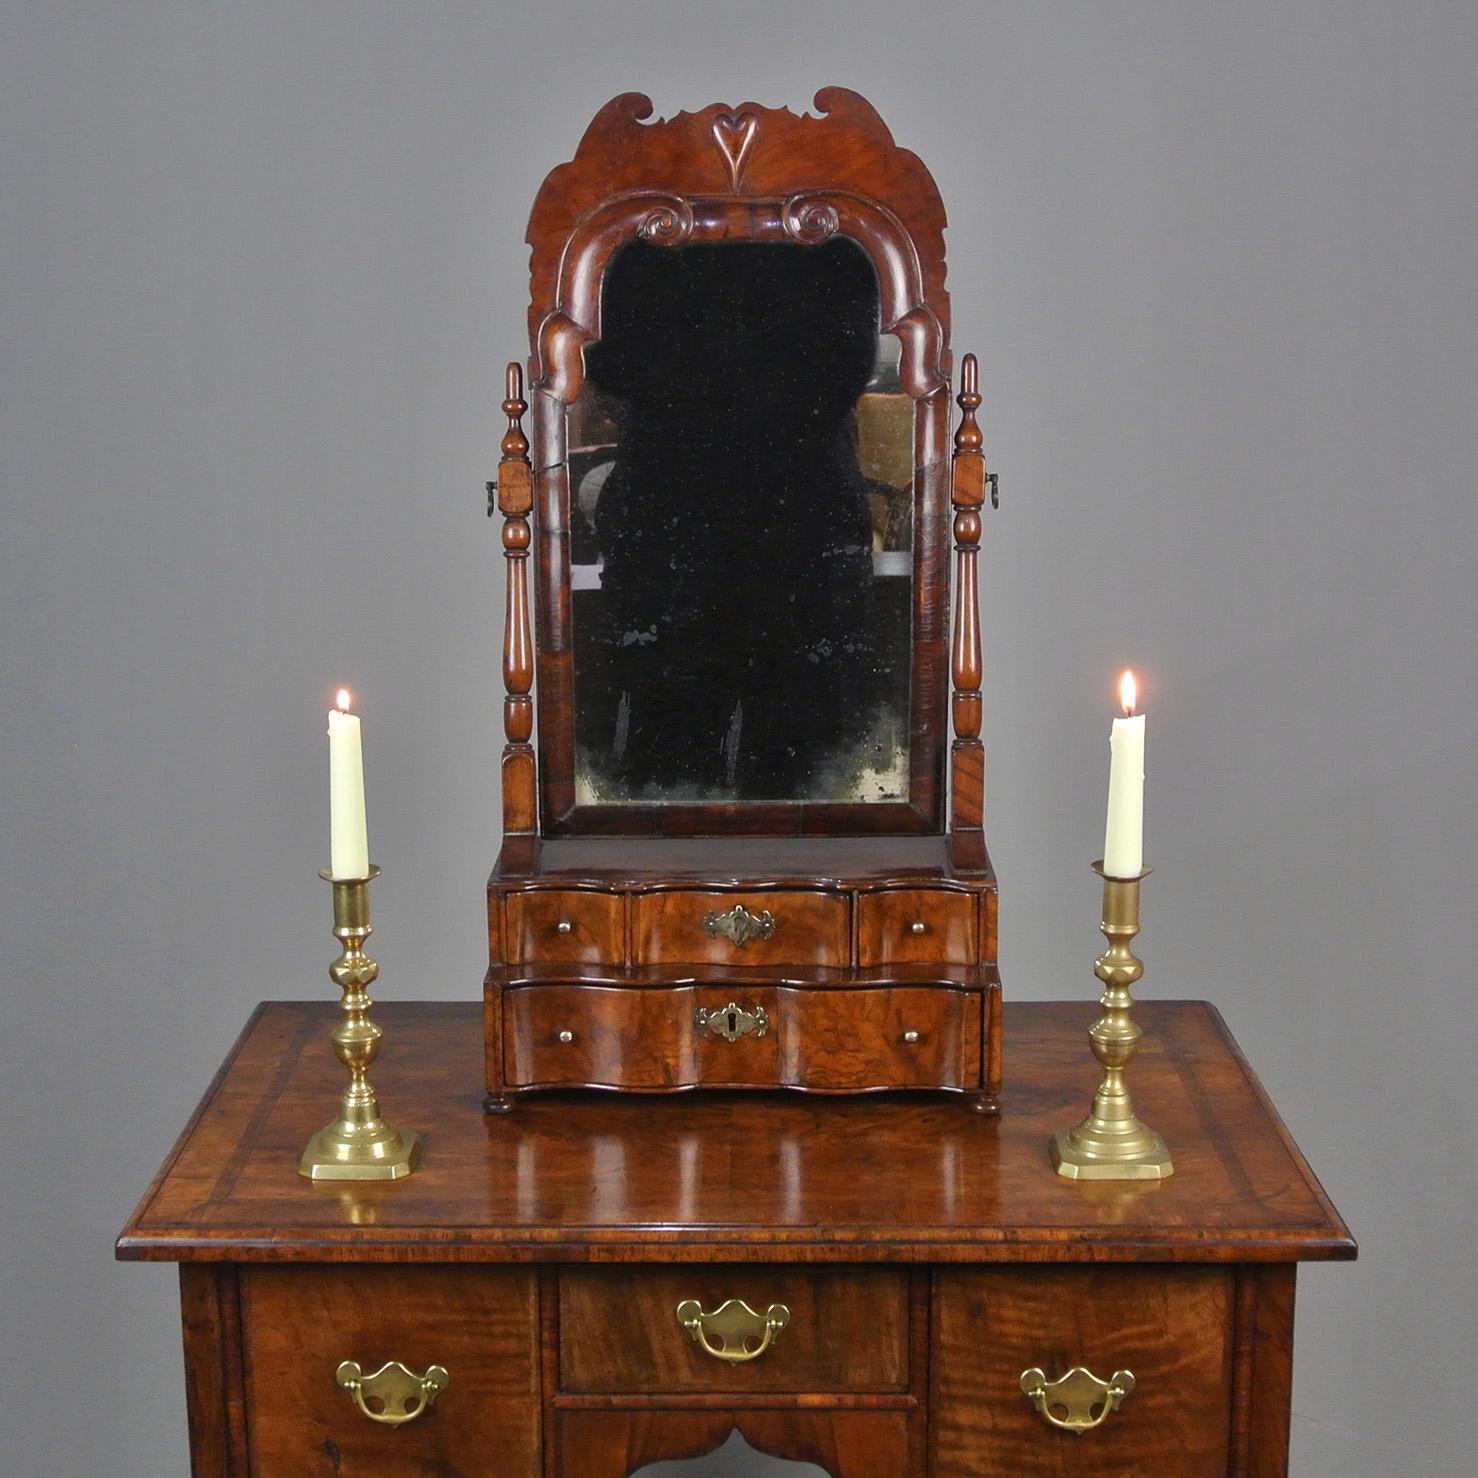 A very beautiful early 18th century walnut dressing table mirror with serpentine fronted drawers and cushion frame.  Such mirrors are rare, and it is unusual and desirable to find one which has retained its original walnut cresting.  Here the